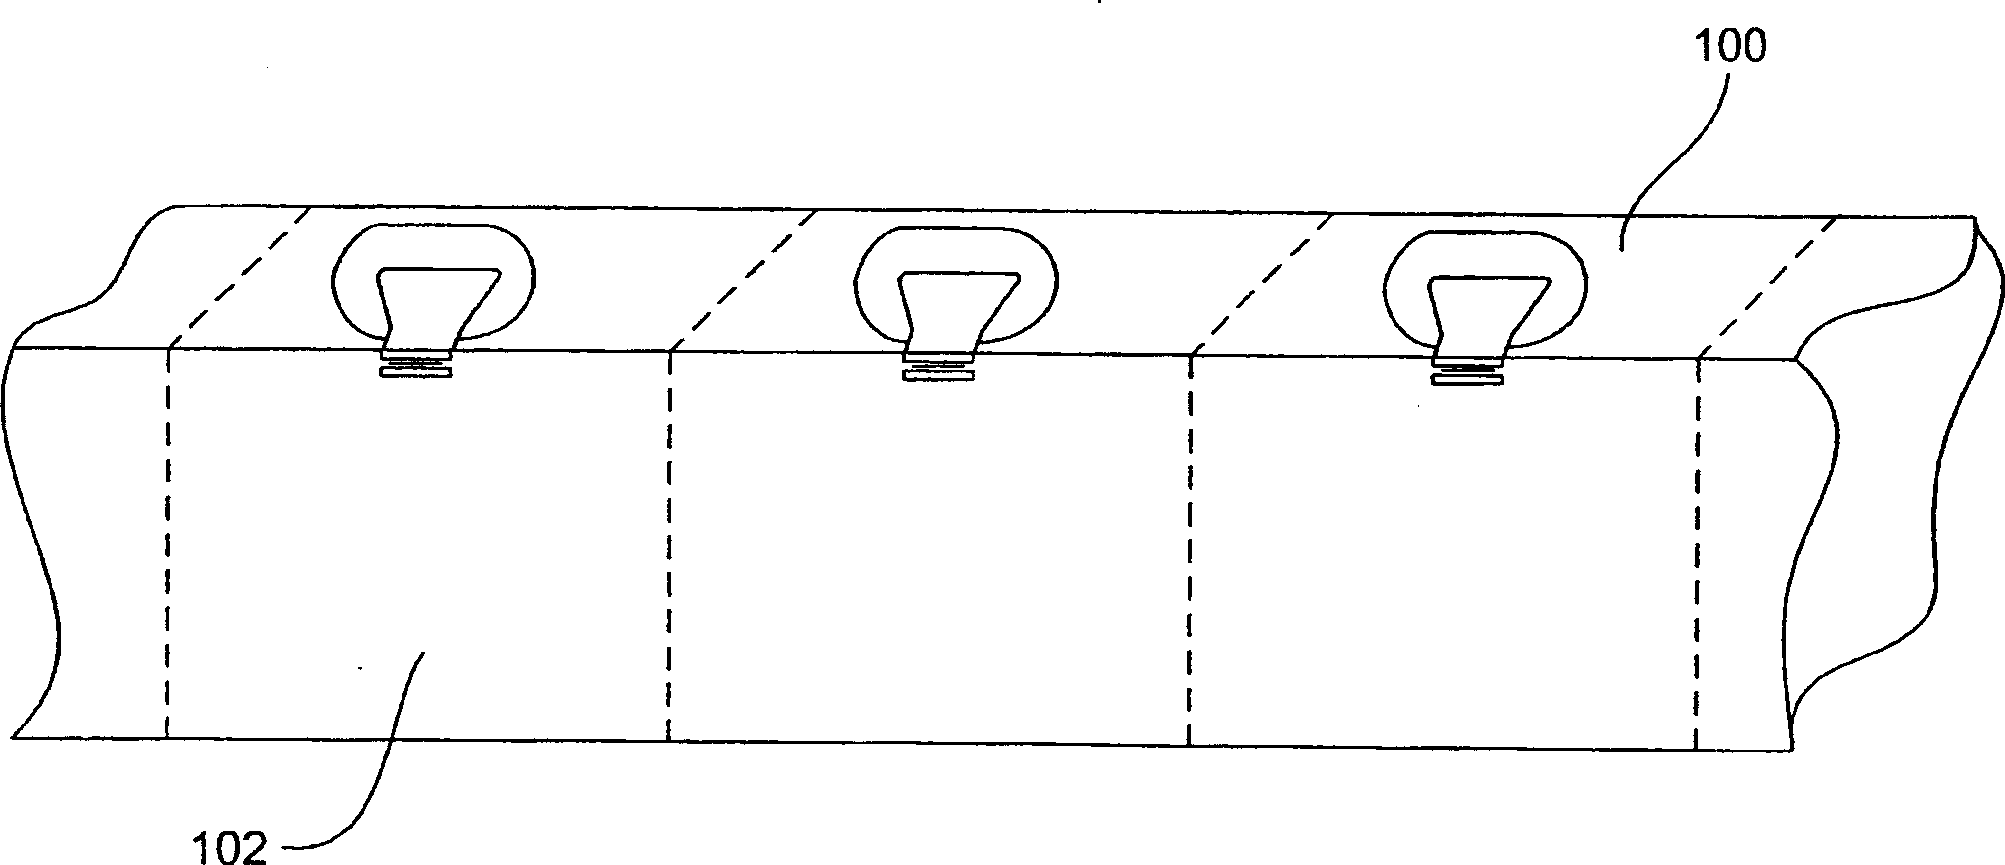 Electrical lapping guide embedded in a shield of a magnetic head